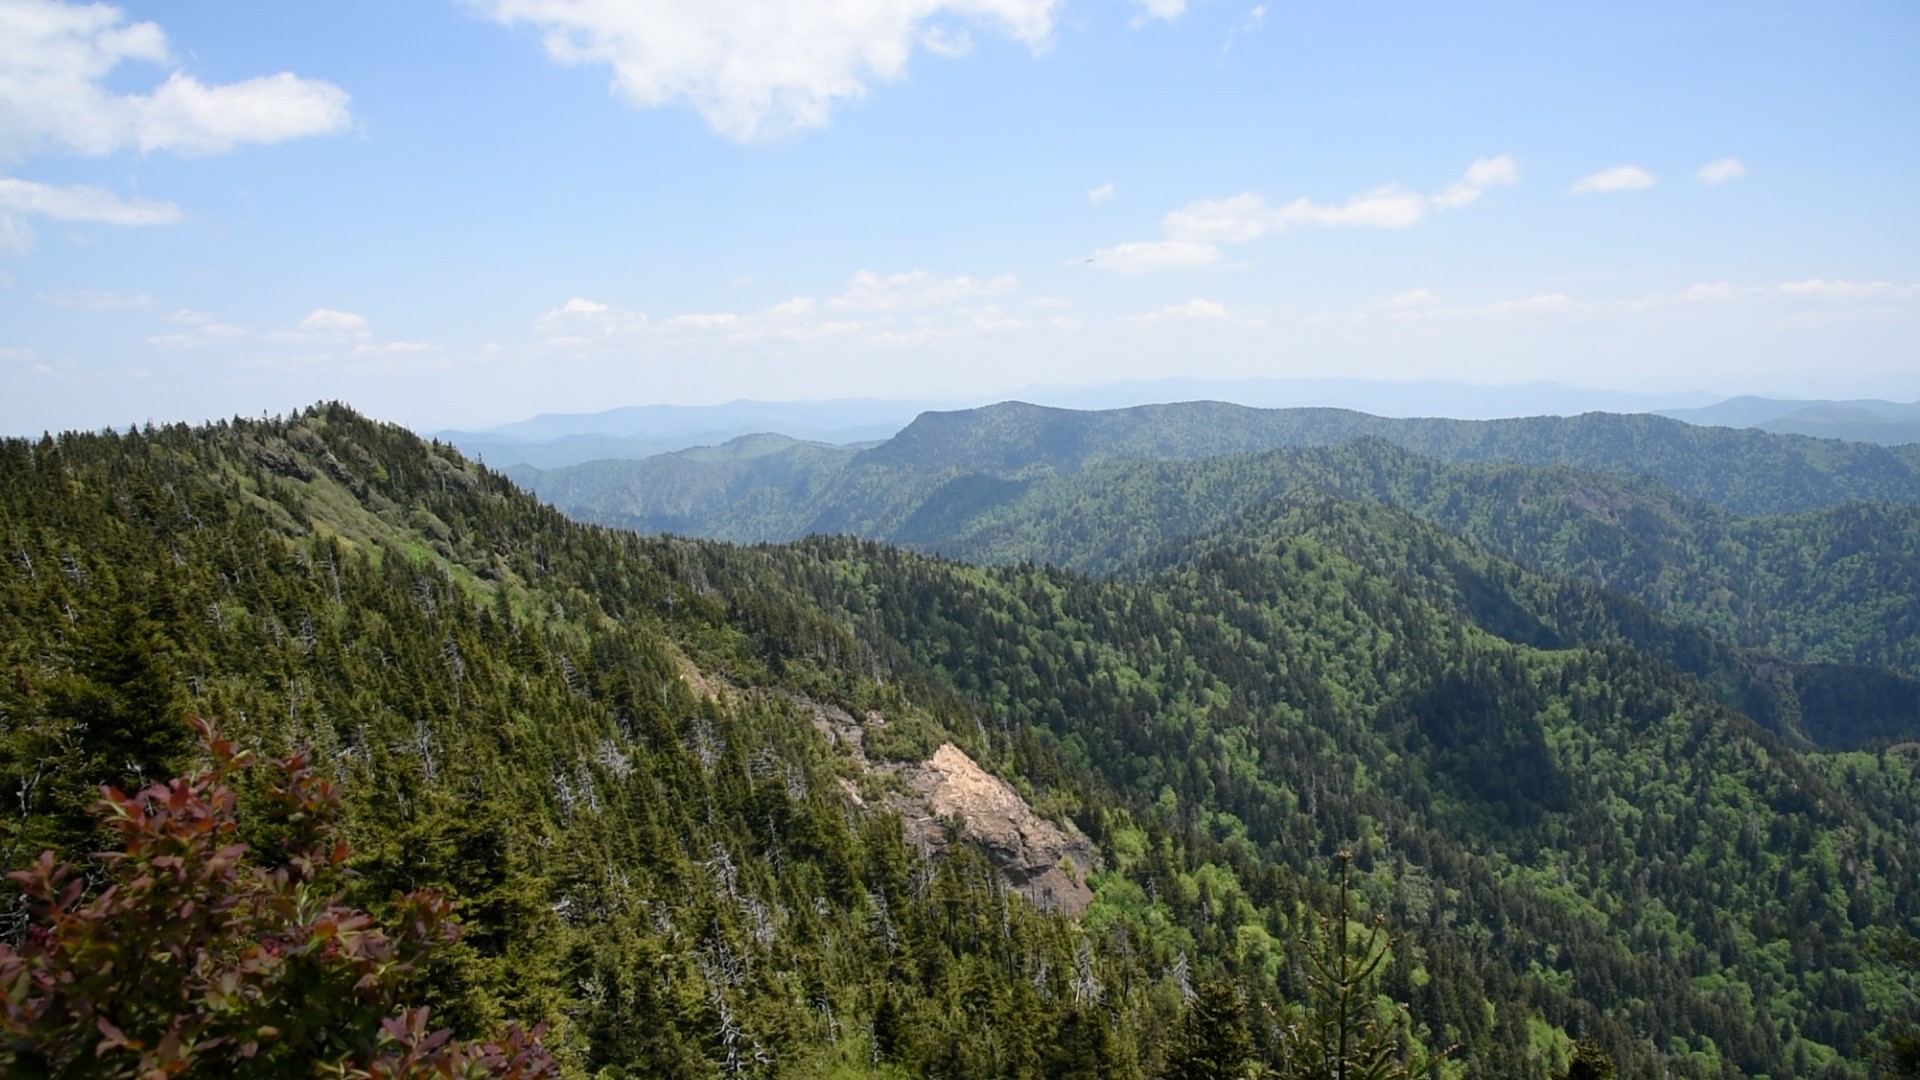 Mount LeConte is the third-highest peak in the Great Smoky Mountains National Park.